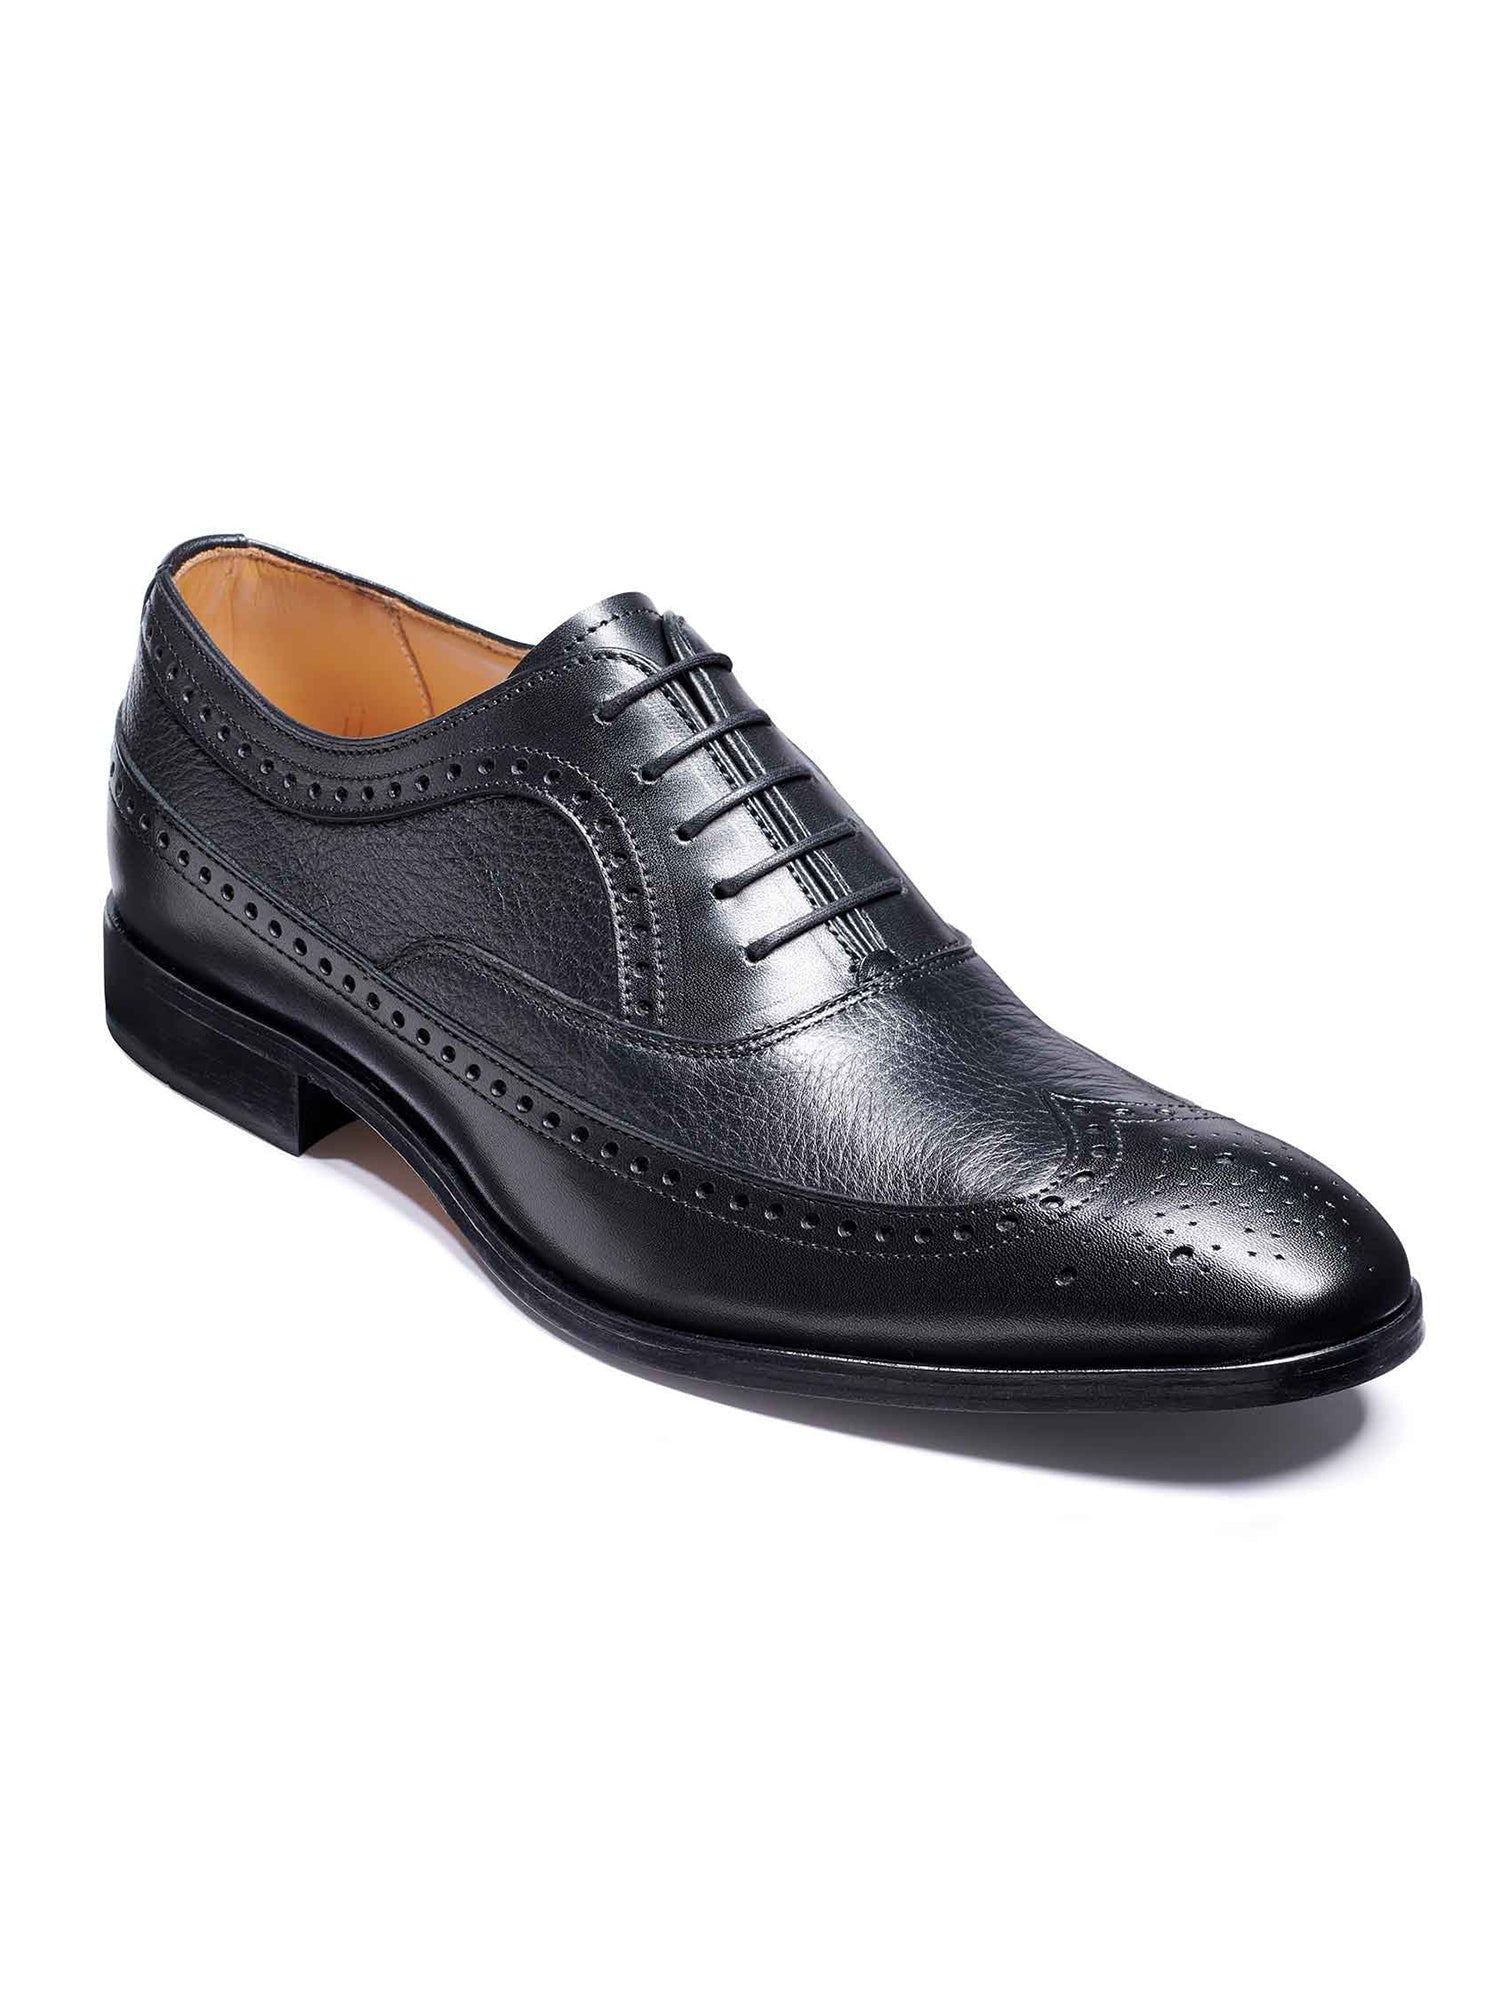 Barker Shoes | Rugby | Black | Buy Now – FOCUS Menswear